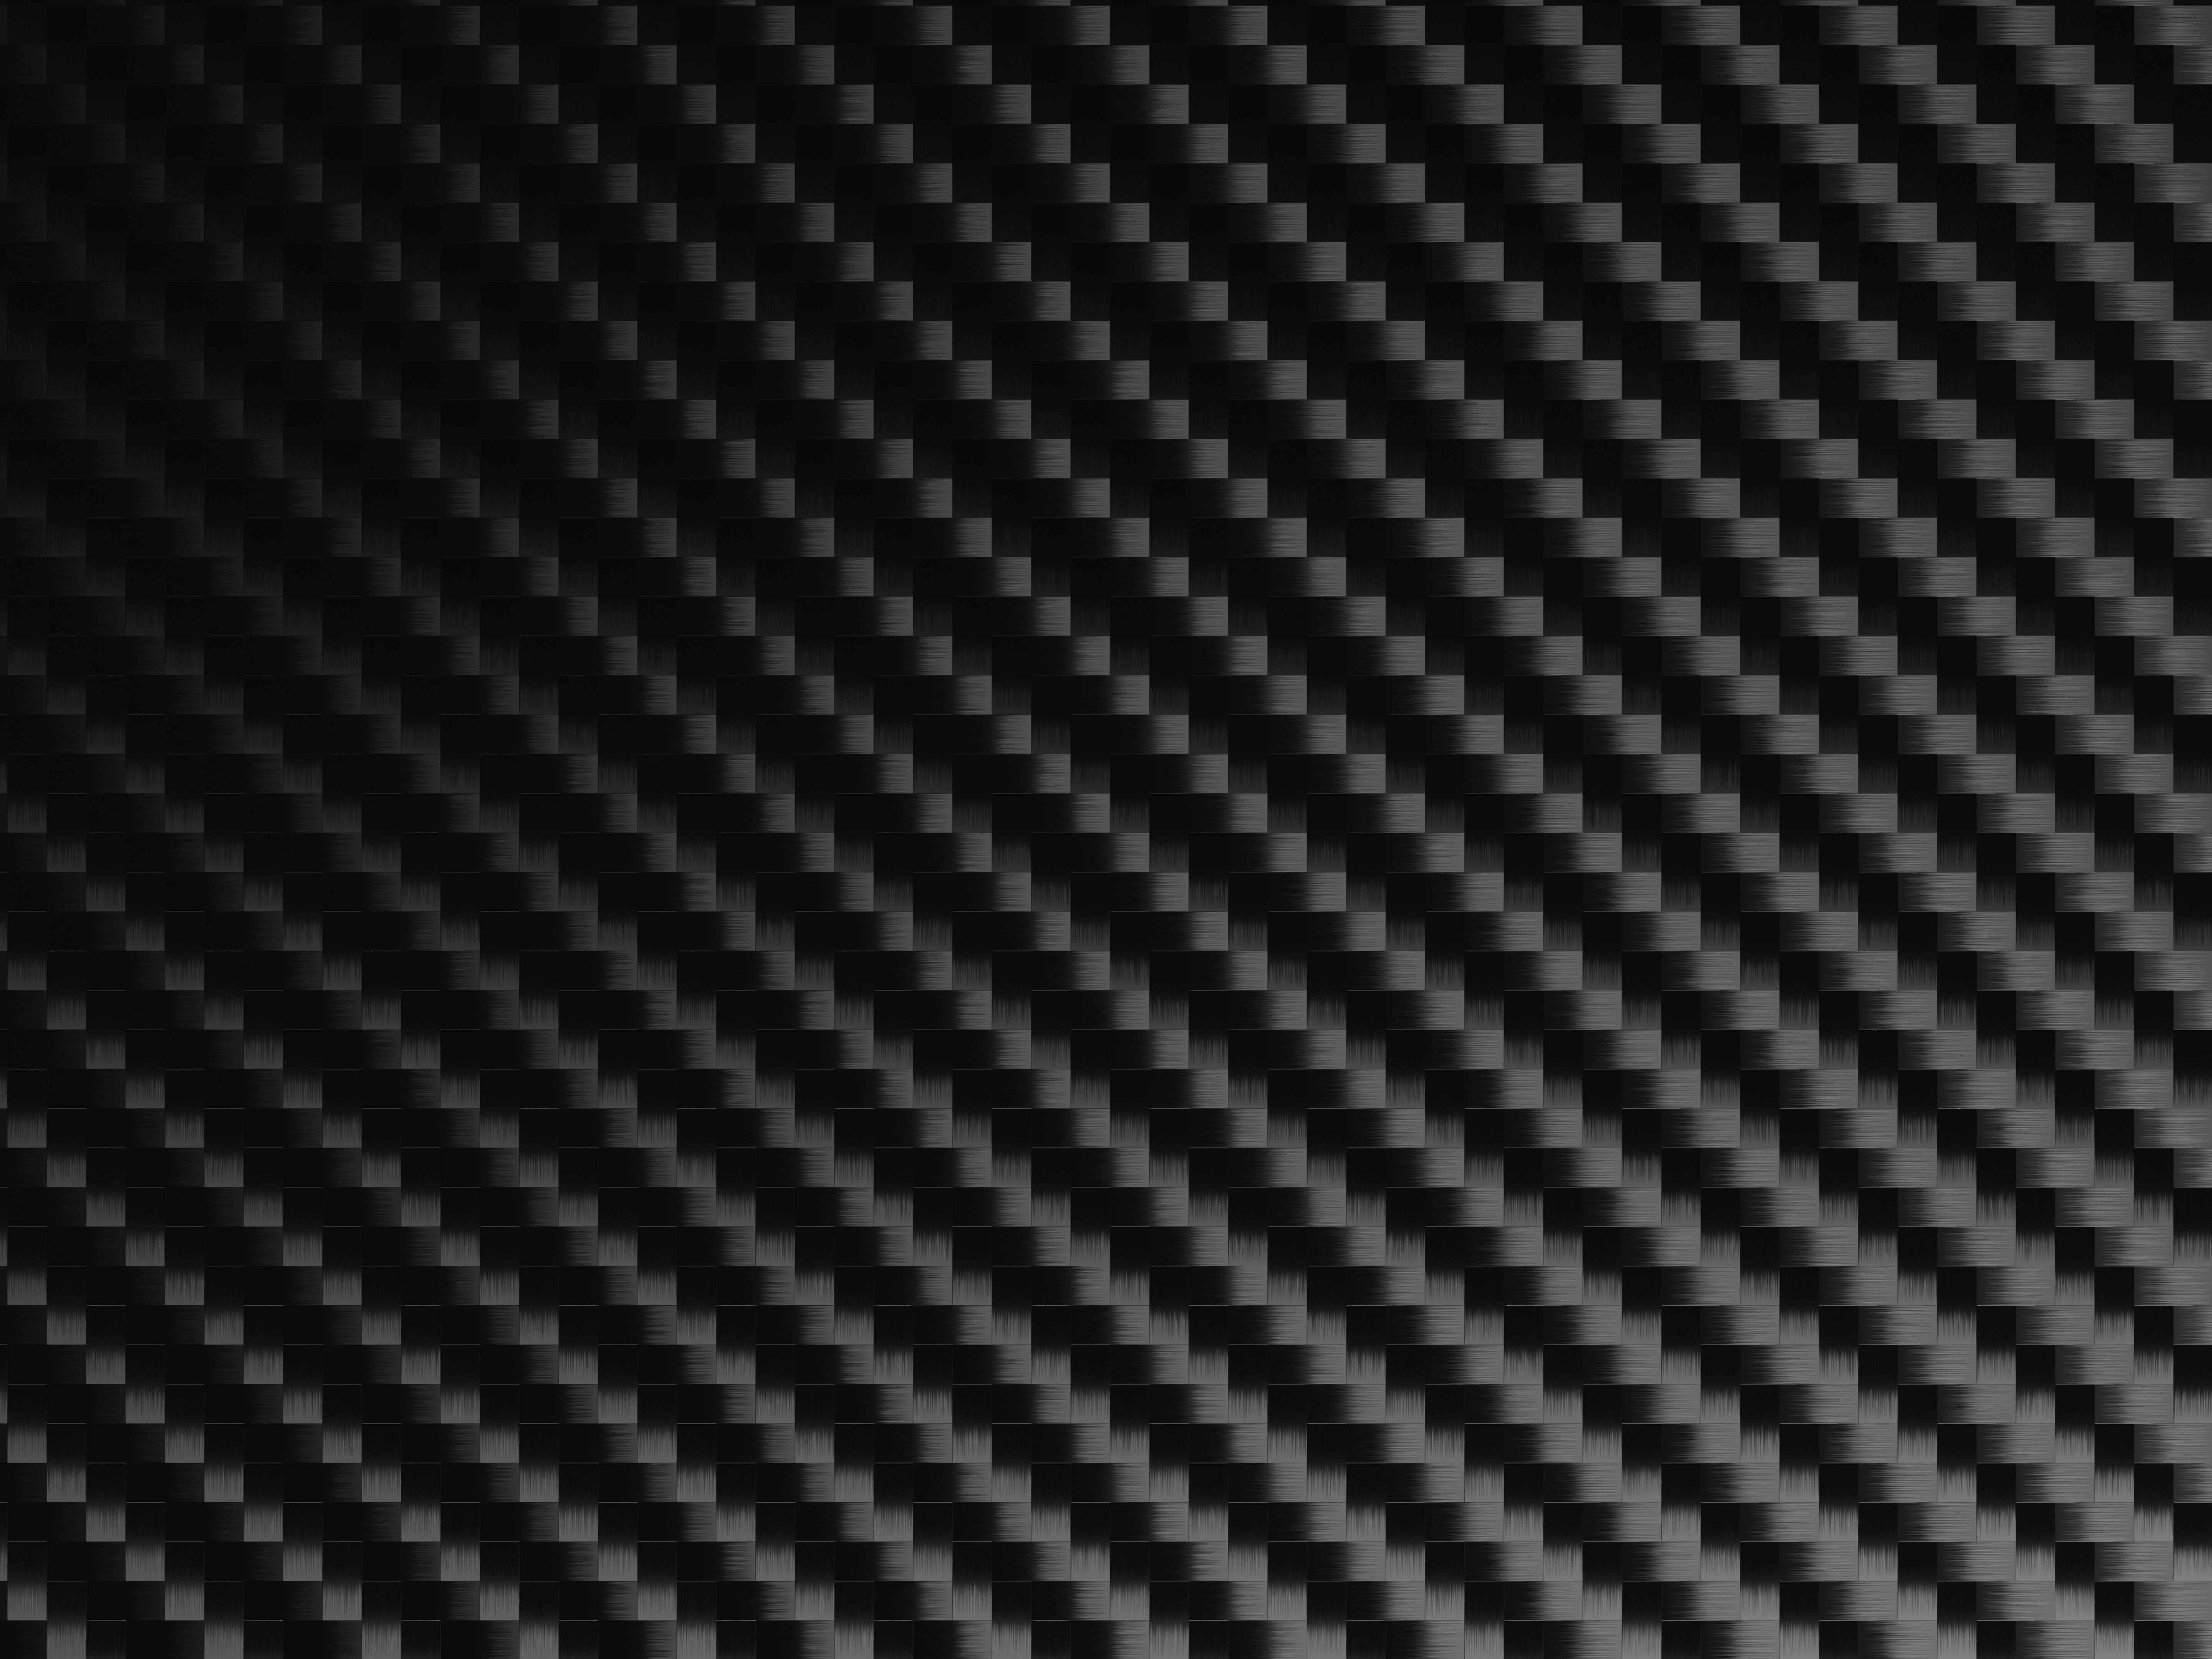 Carbon Fiber Carbon-fiber-background-carbon-fiber-texture-royalty-free-image-1630437846